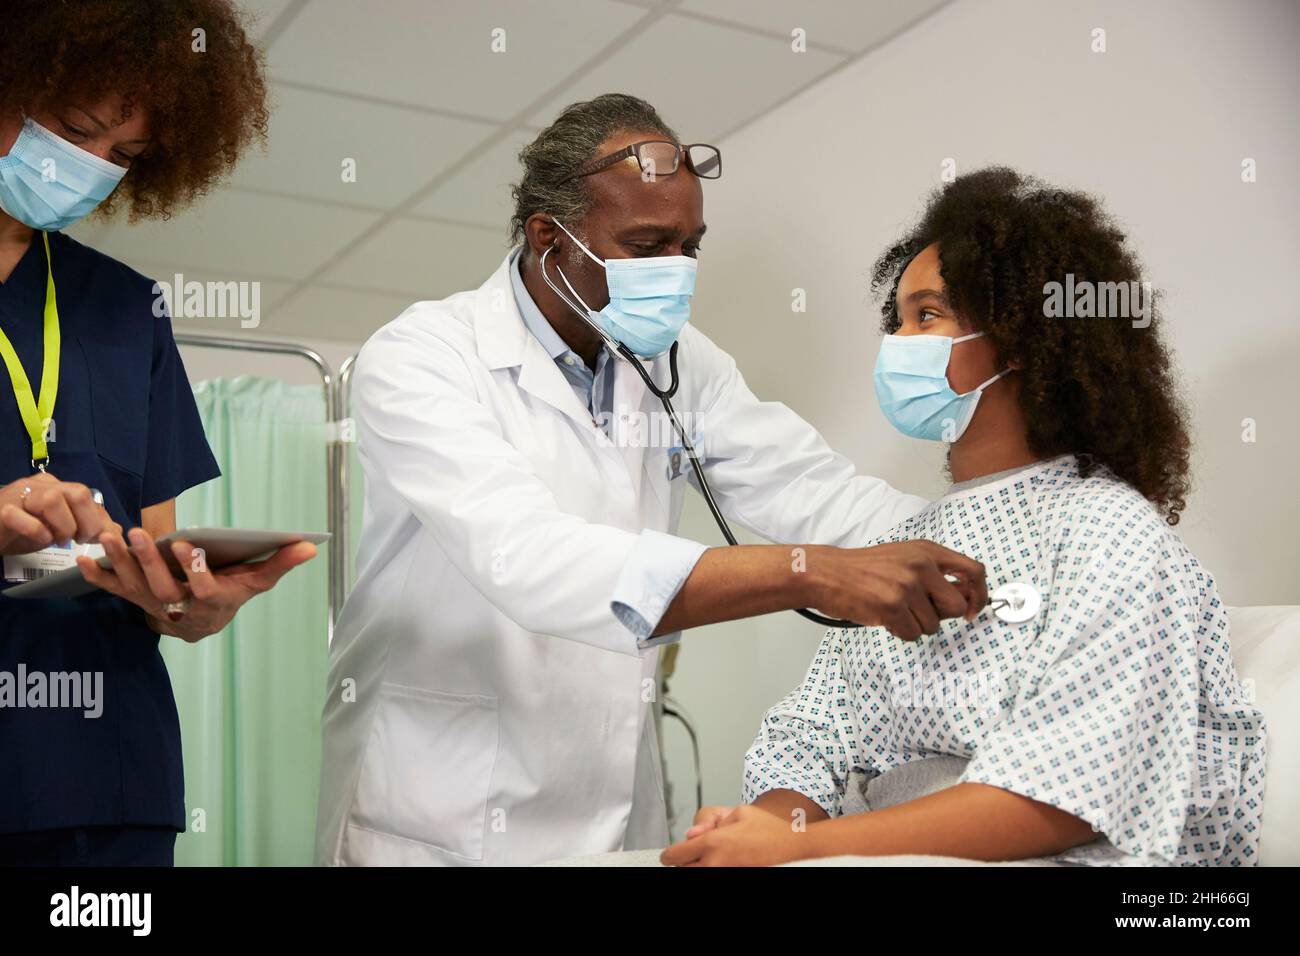 Doctor examining patient standing with female nurse in medical room Stock Photo